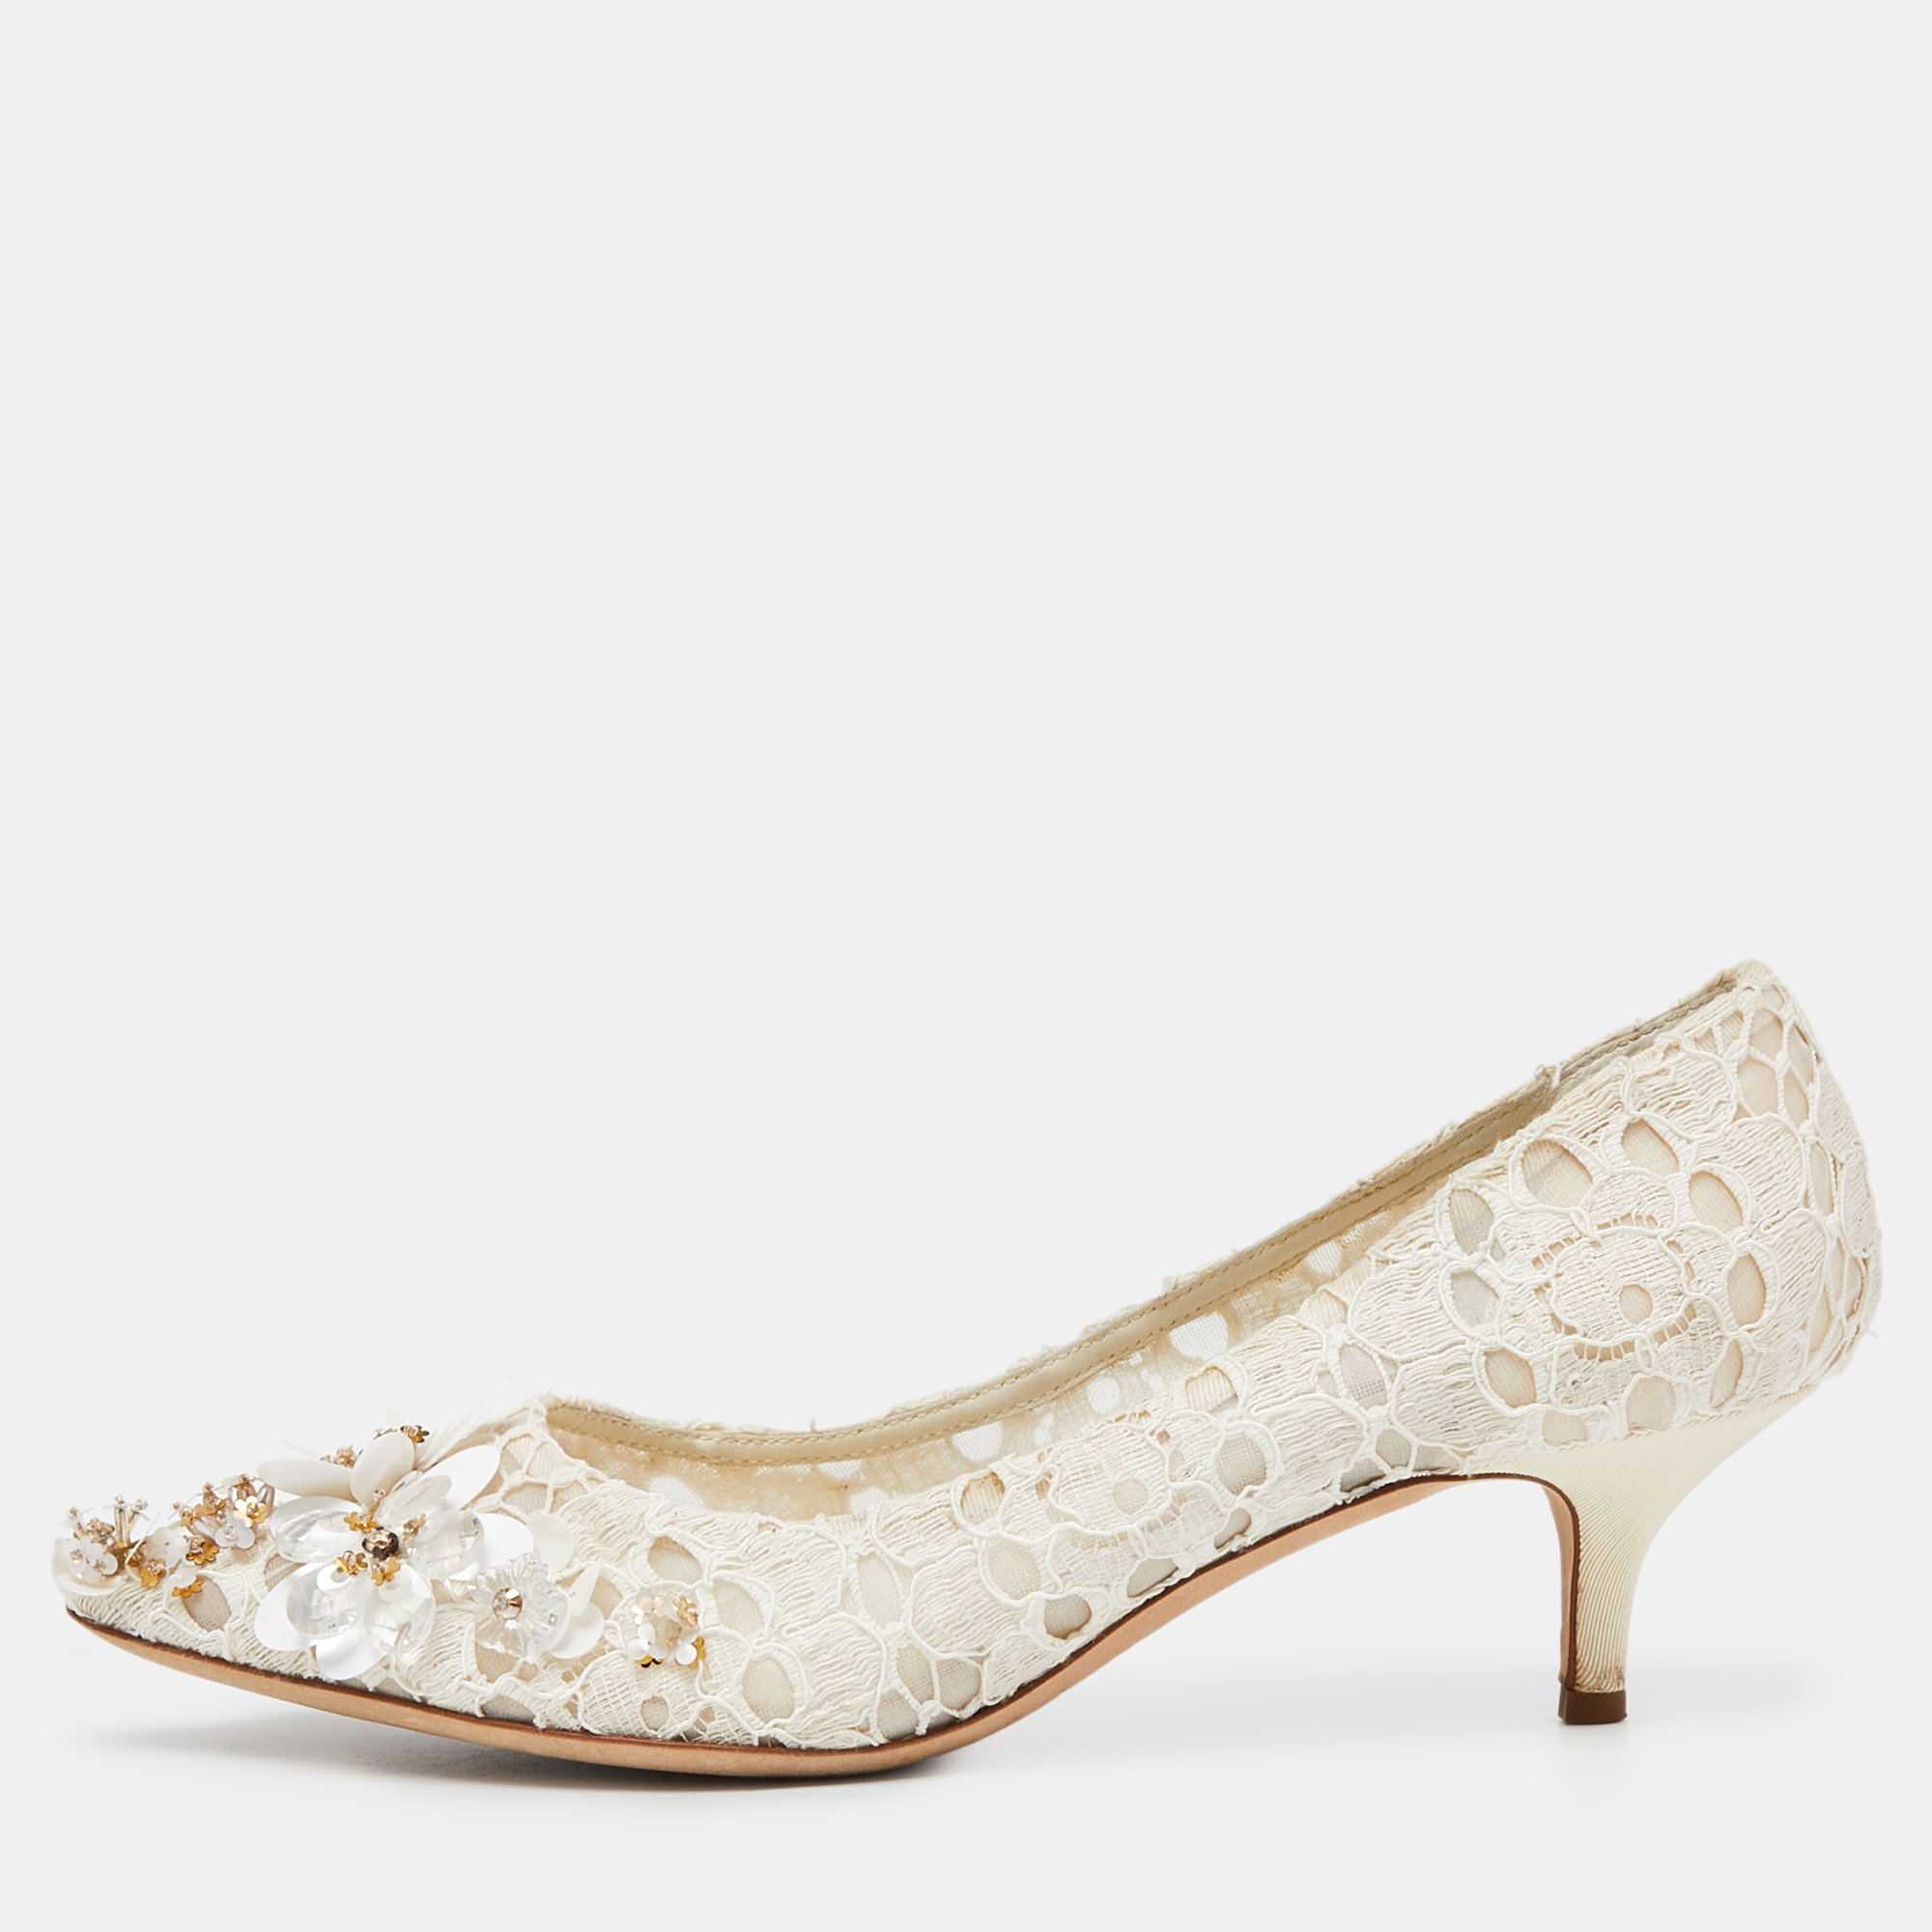 

Dolce & Gabbana Off White Lace Sequin/Beads Embellished Bellucci Pumps Size